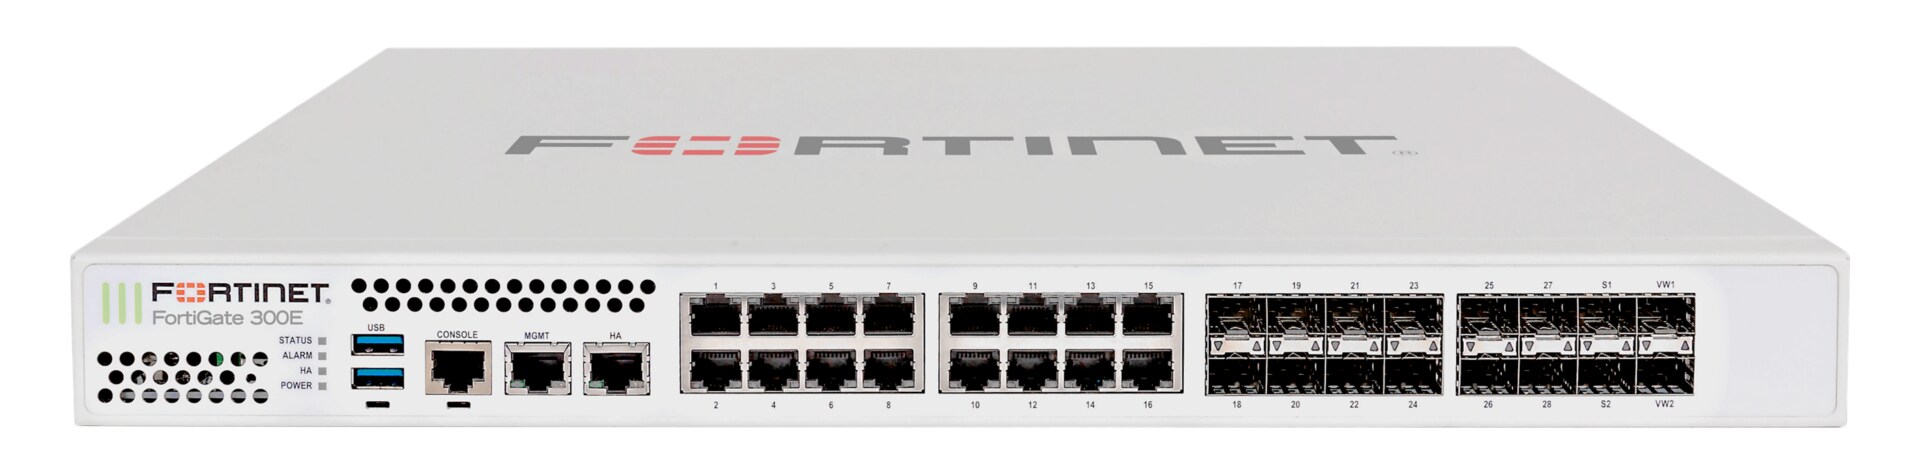 Fortinet FortiGate 300E Security Appliance